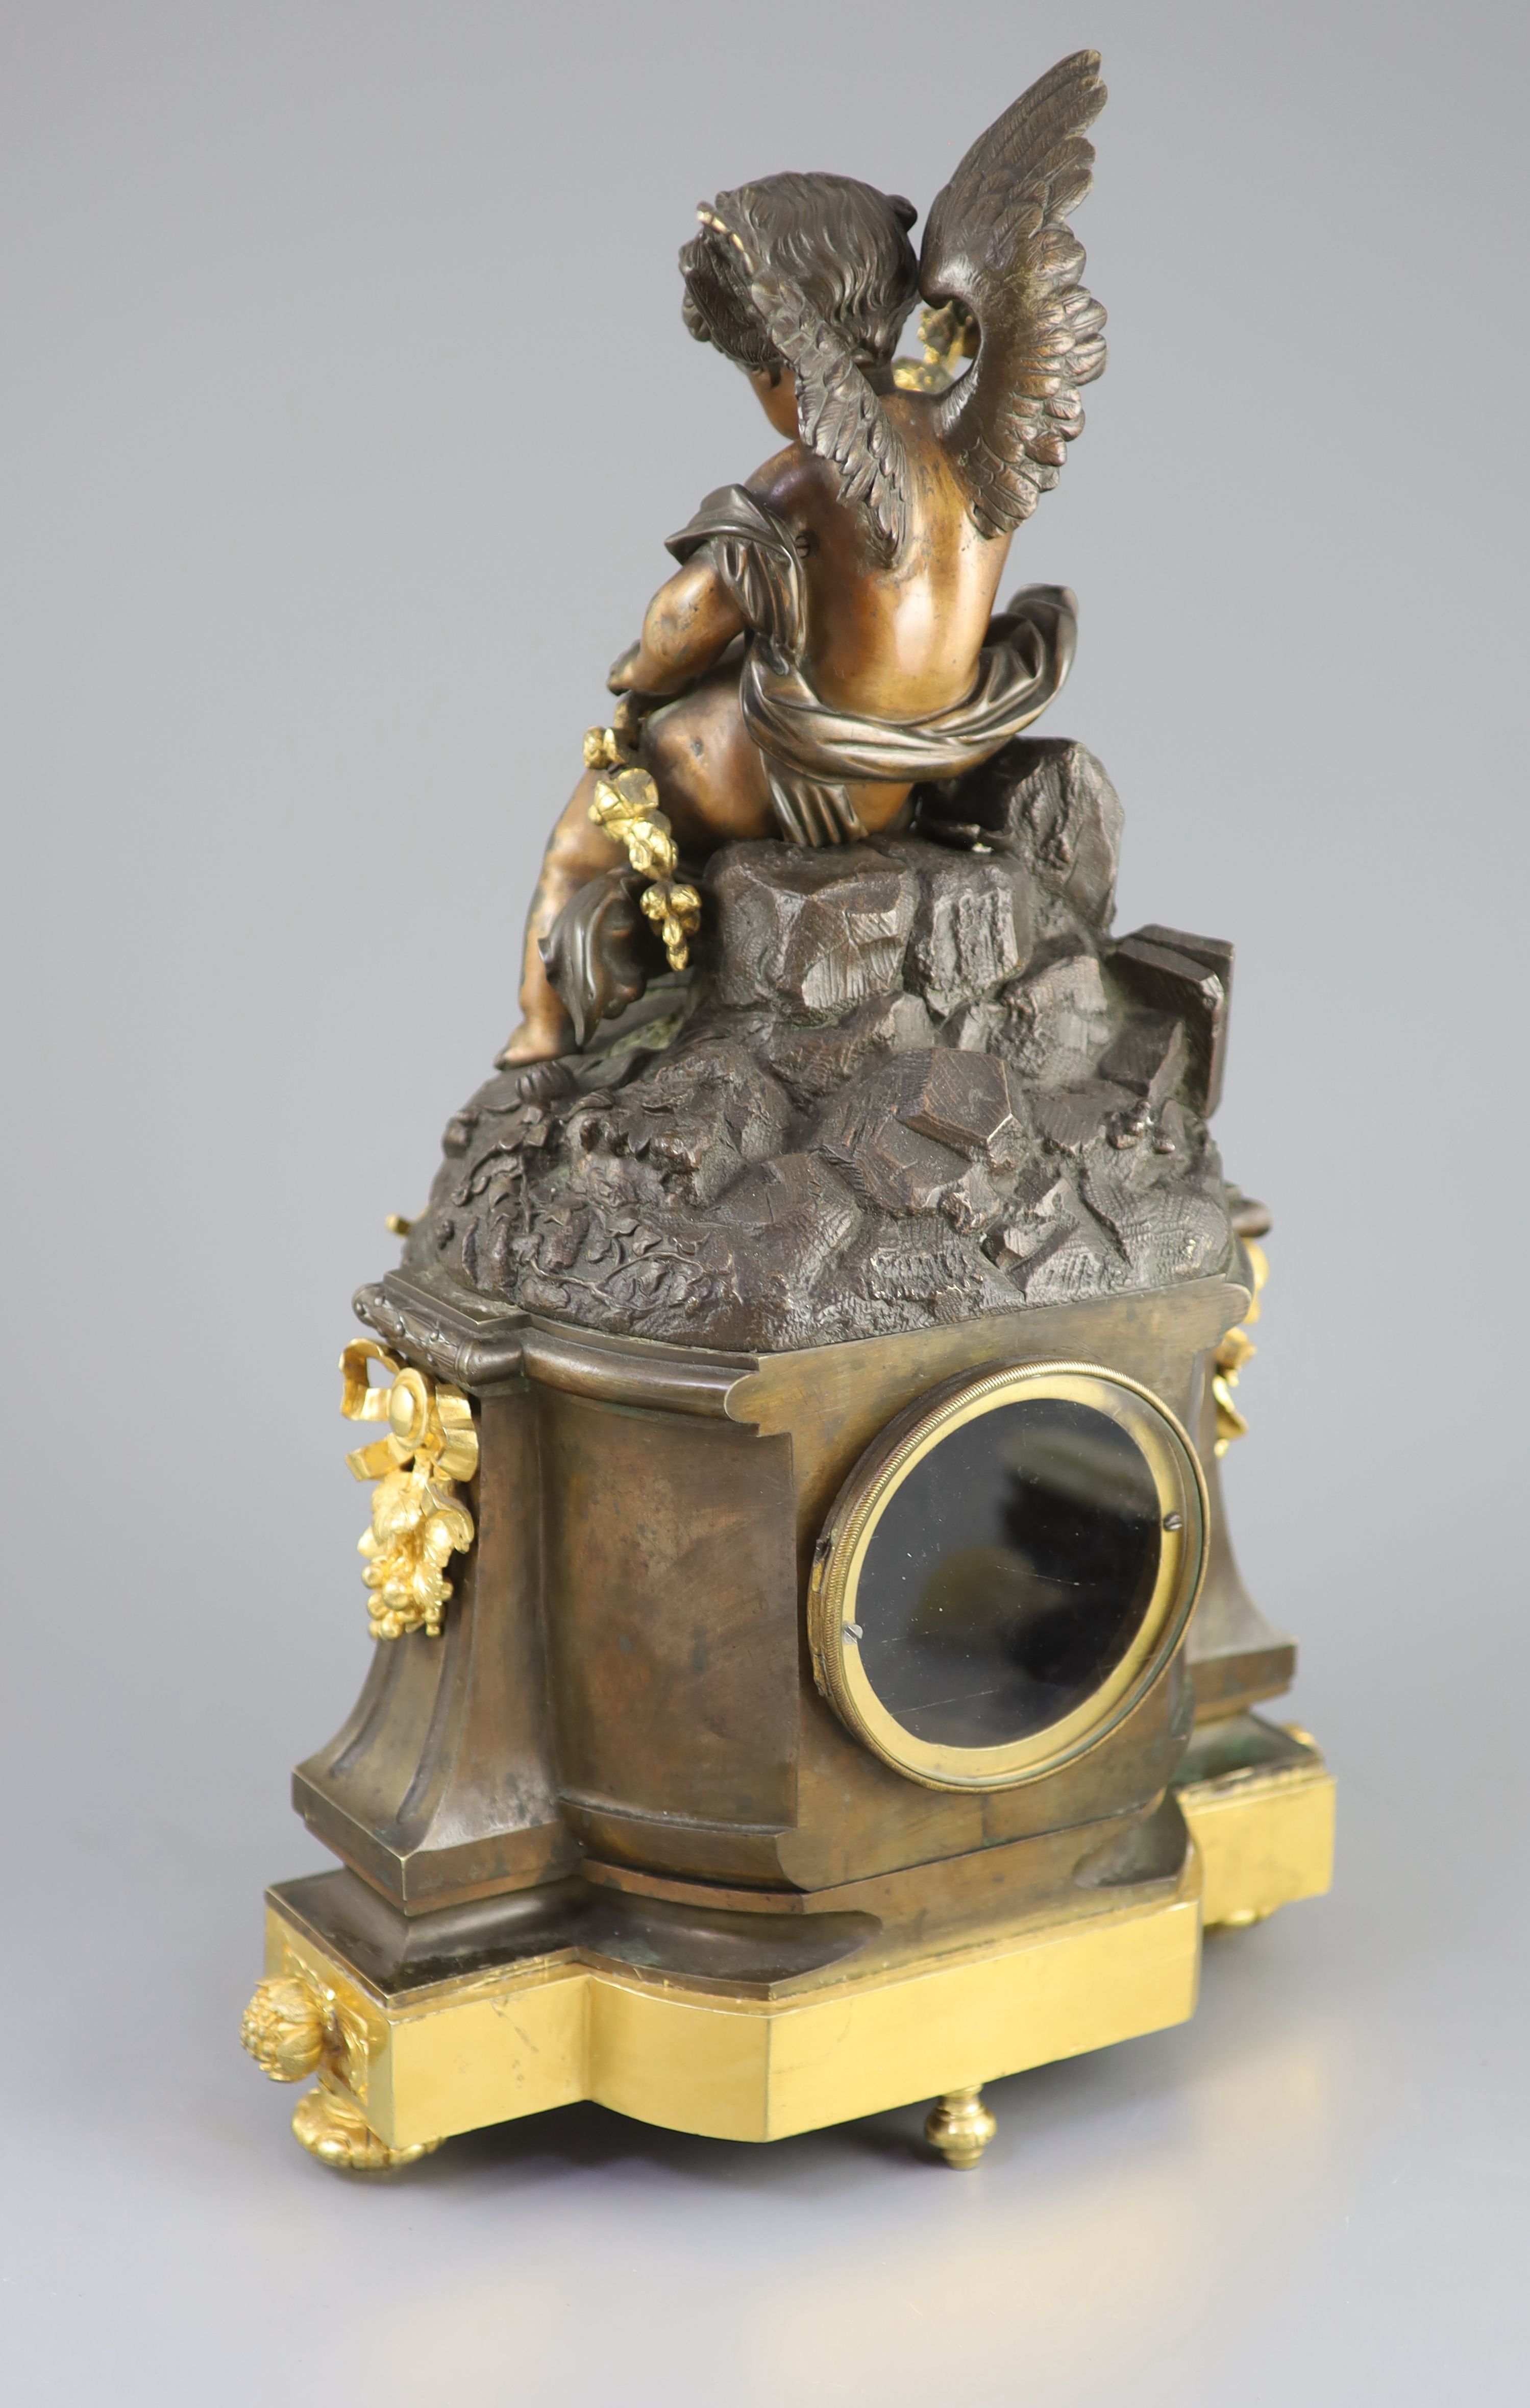 A large French figural bronze and ormolu mantel clock, 19th century 46cm high.